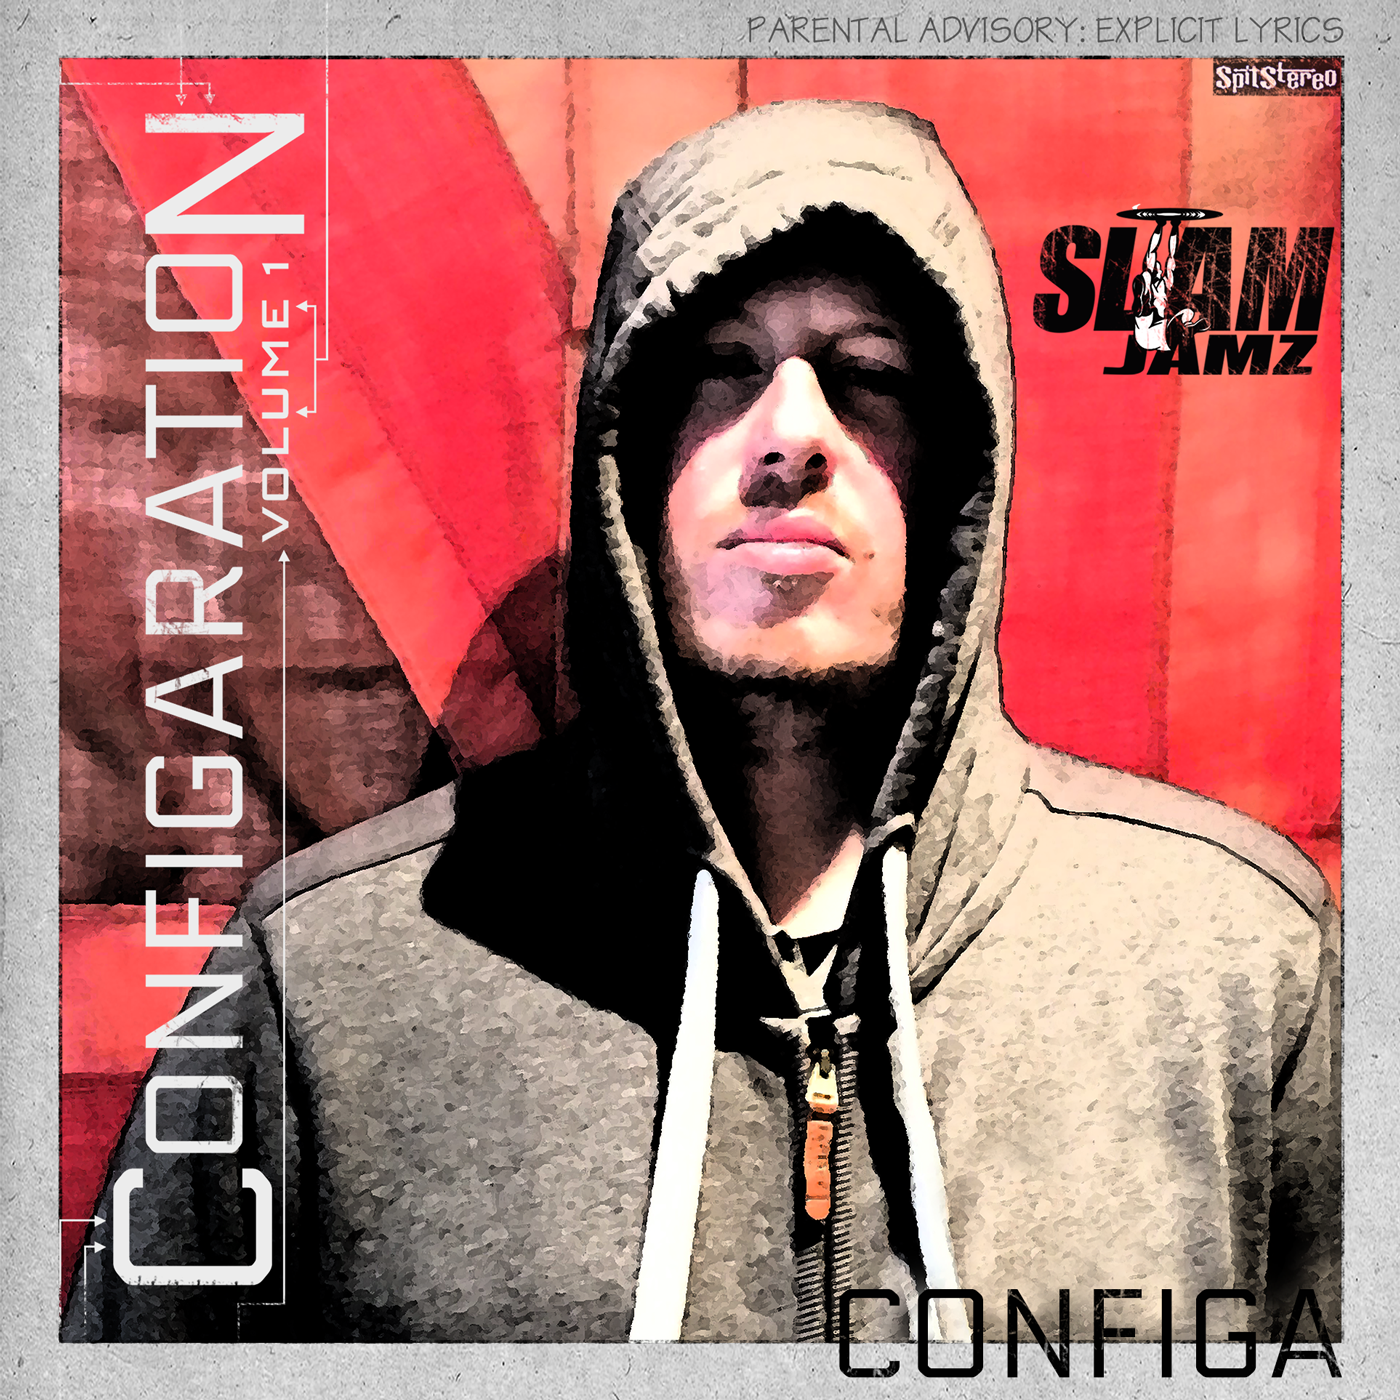 Get Configaration Volume 1 by Configa!